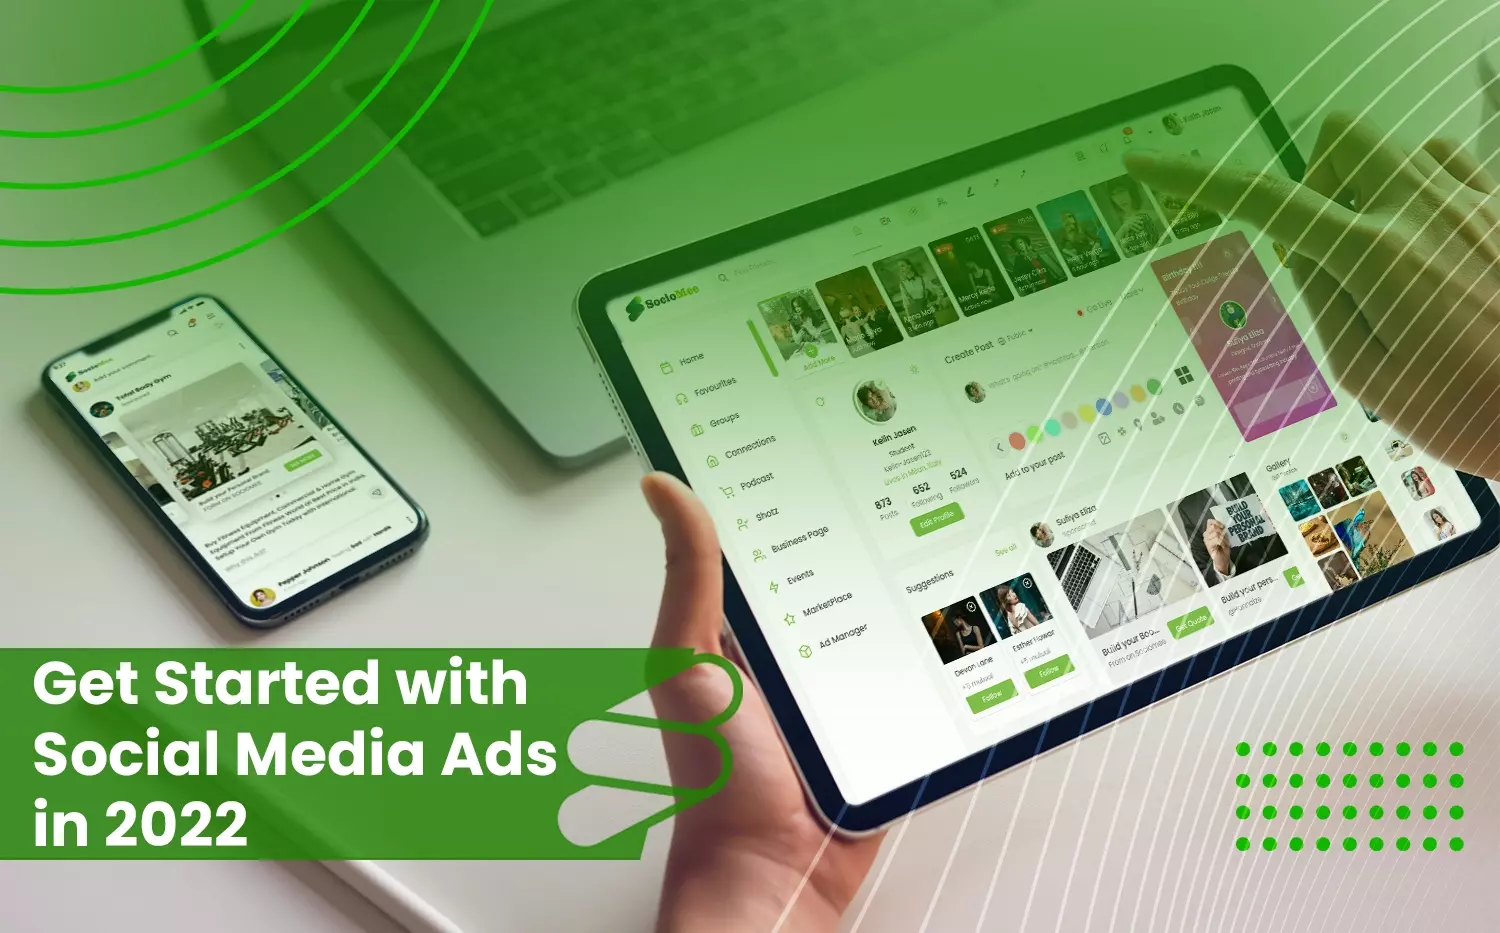 Get Started with Social Media Ads in 2022